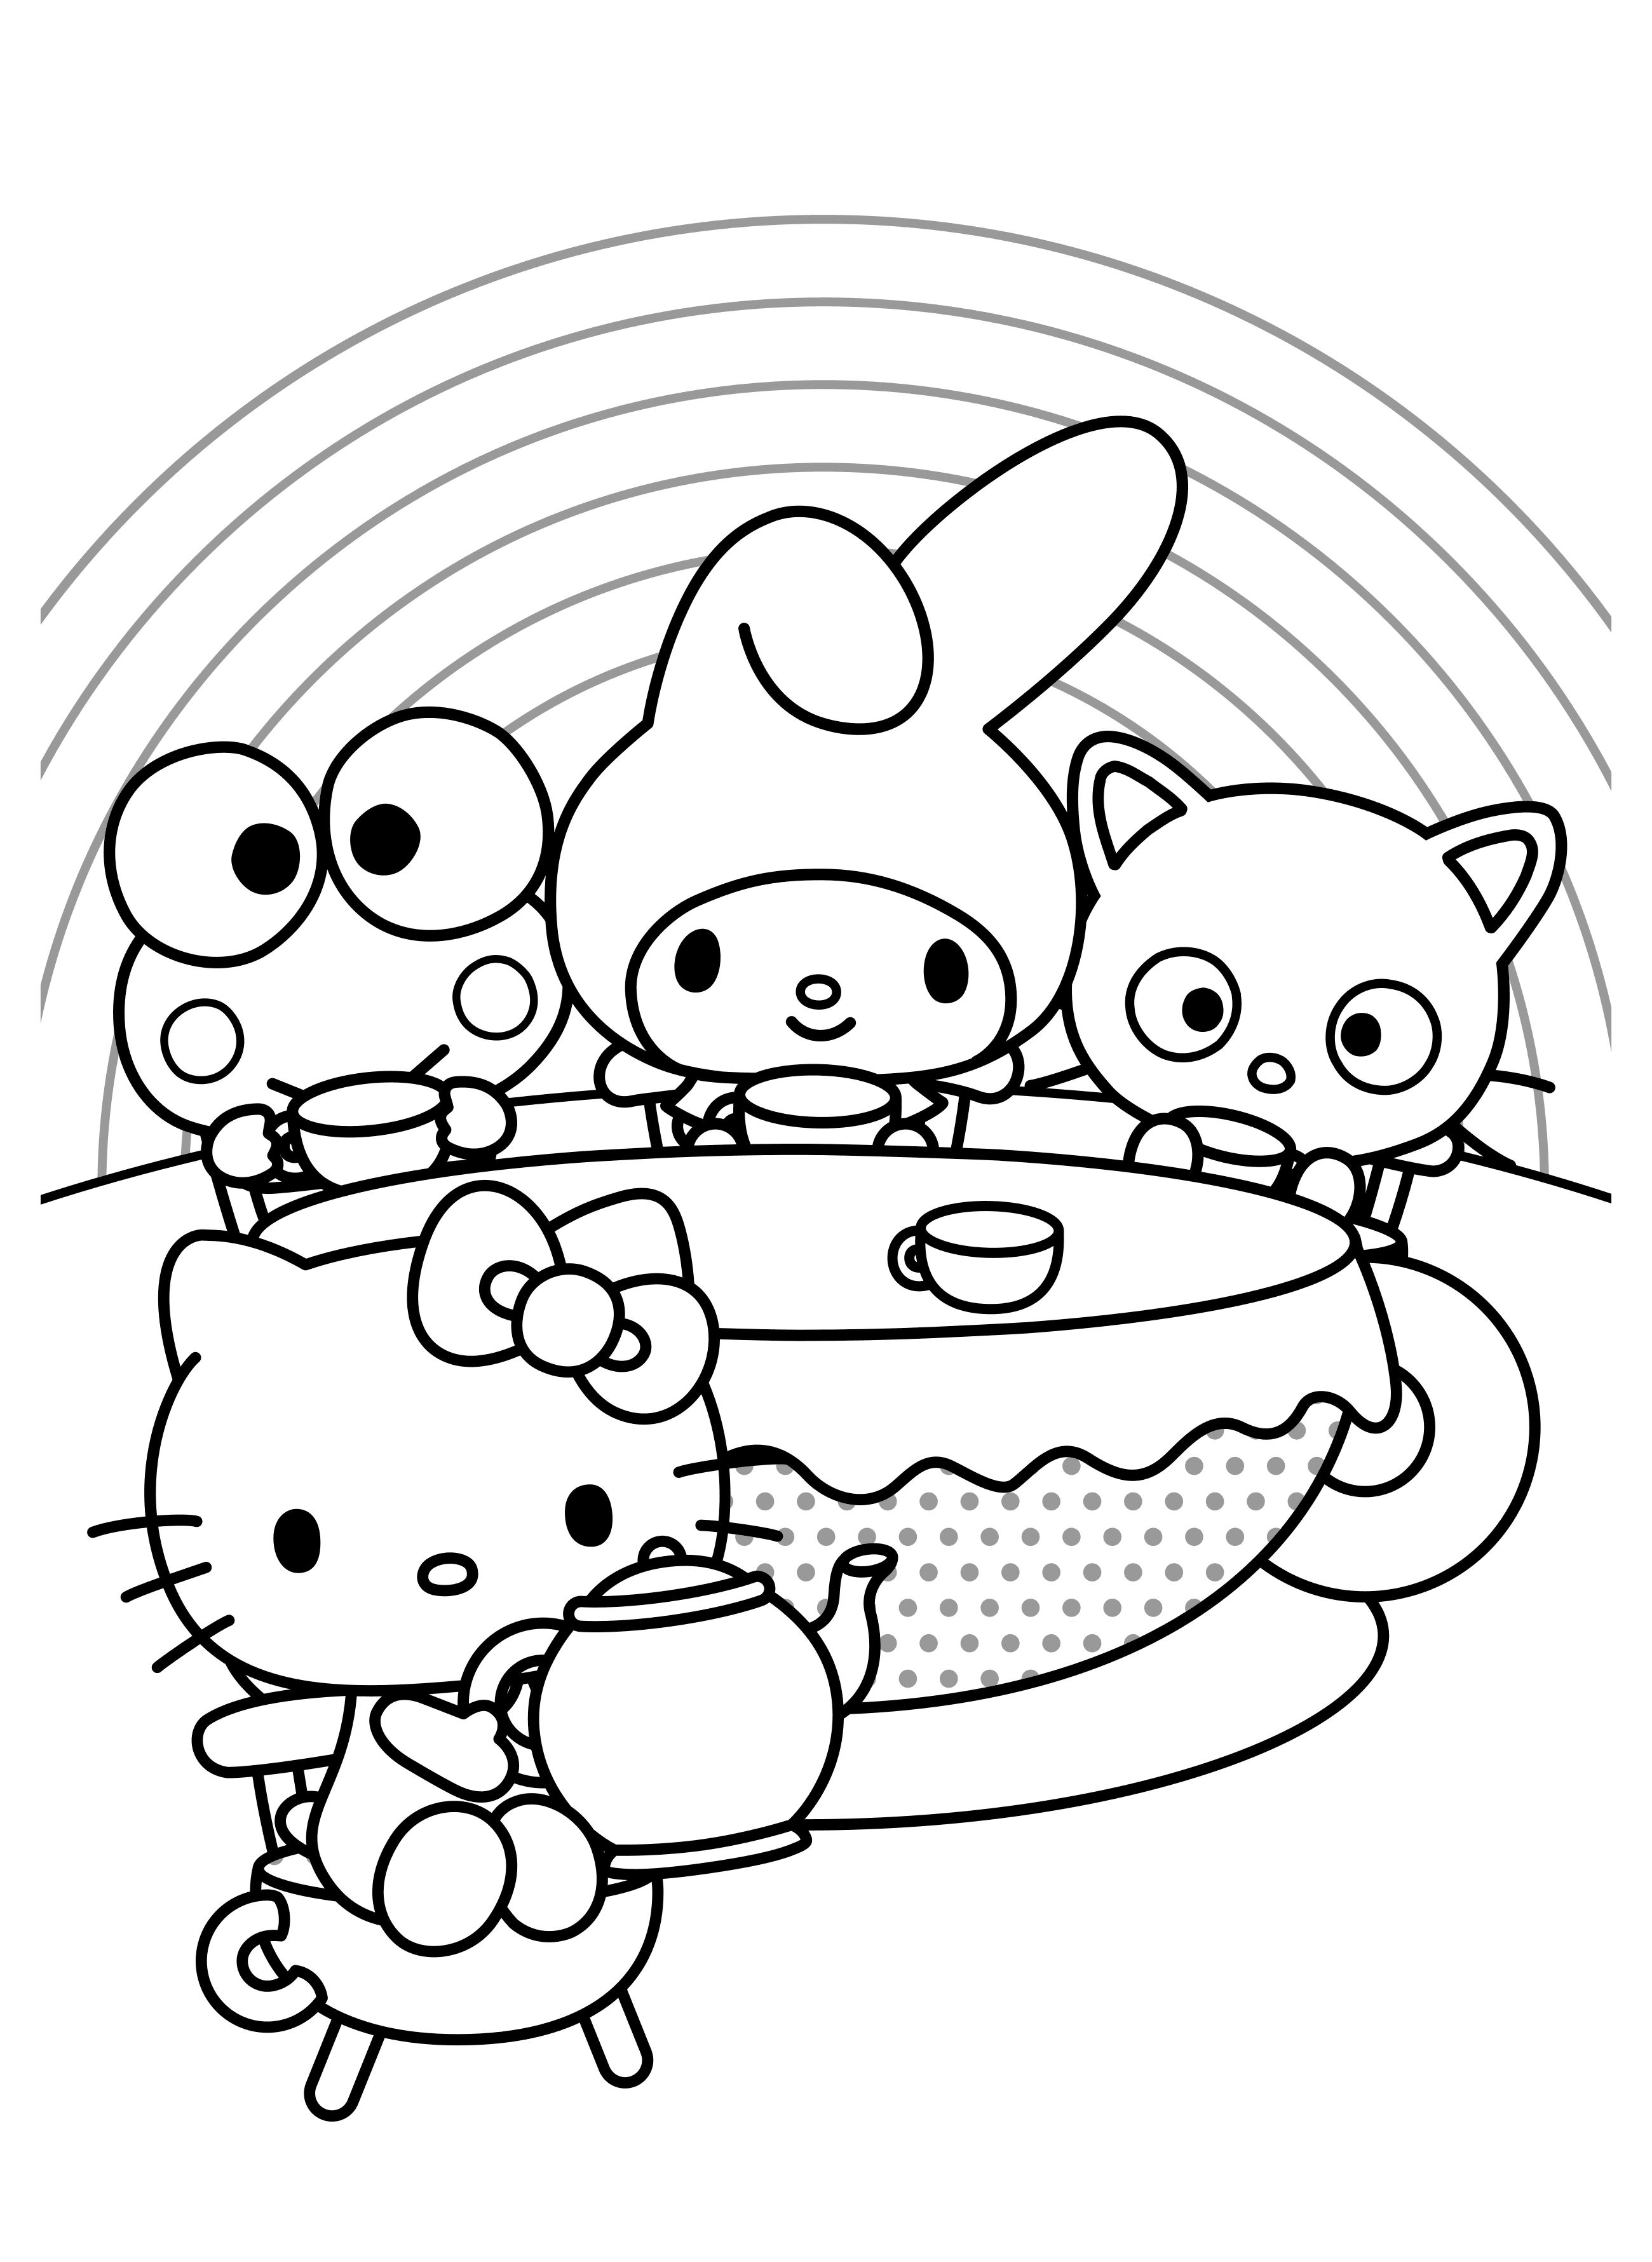 Sanrio Coloring Pages